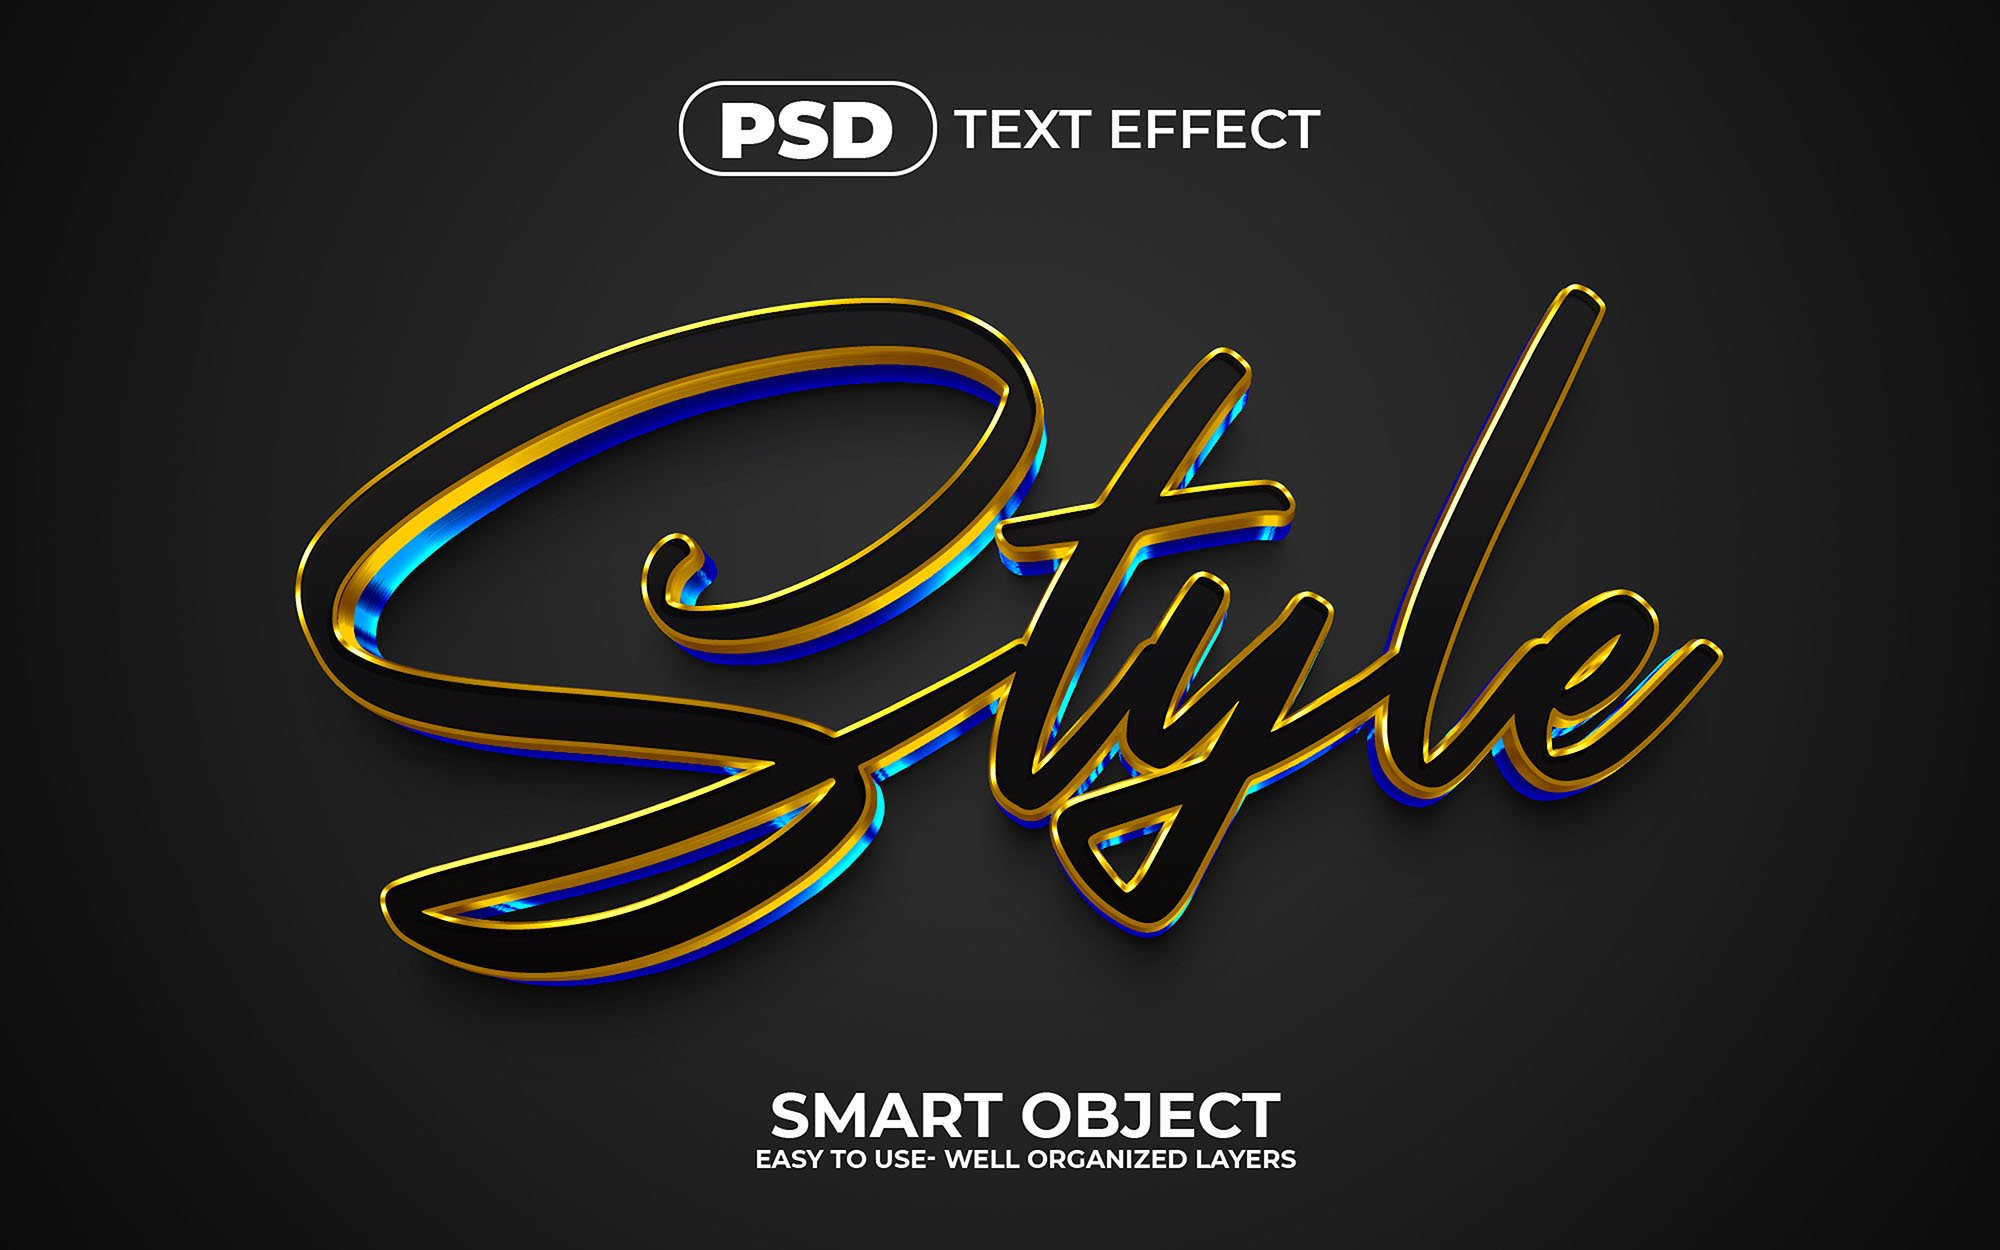 Style 3D Editable Text Effect Stylecover image.